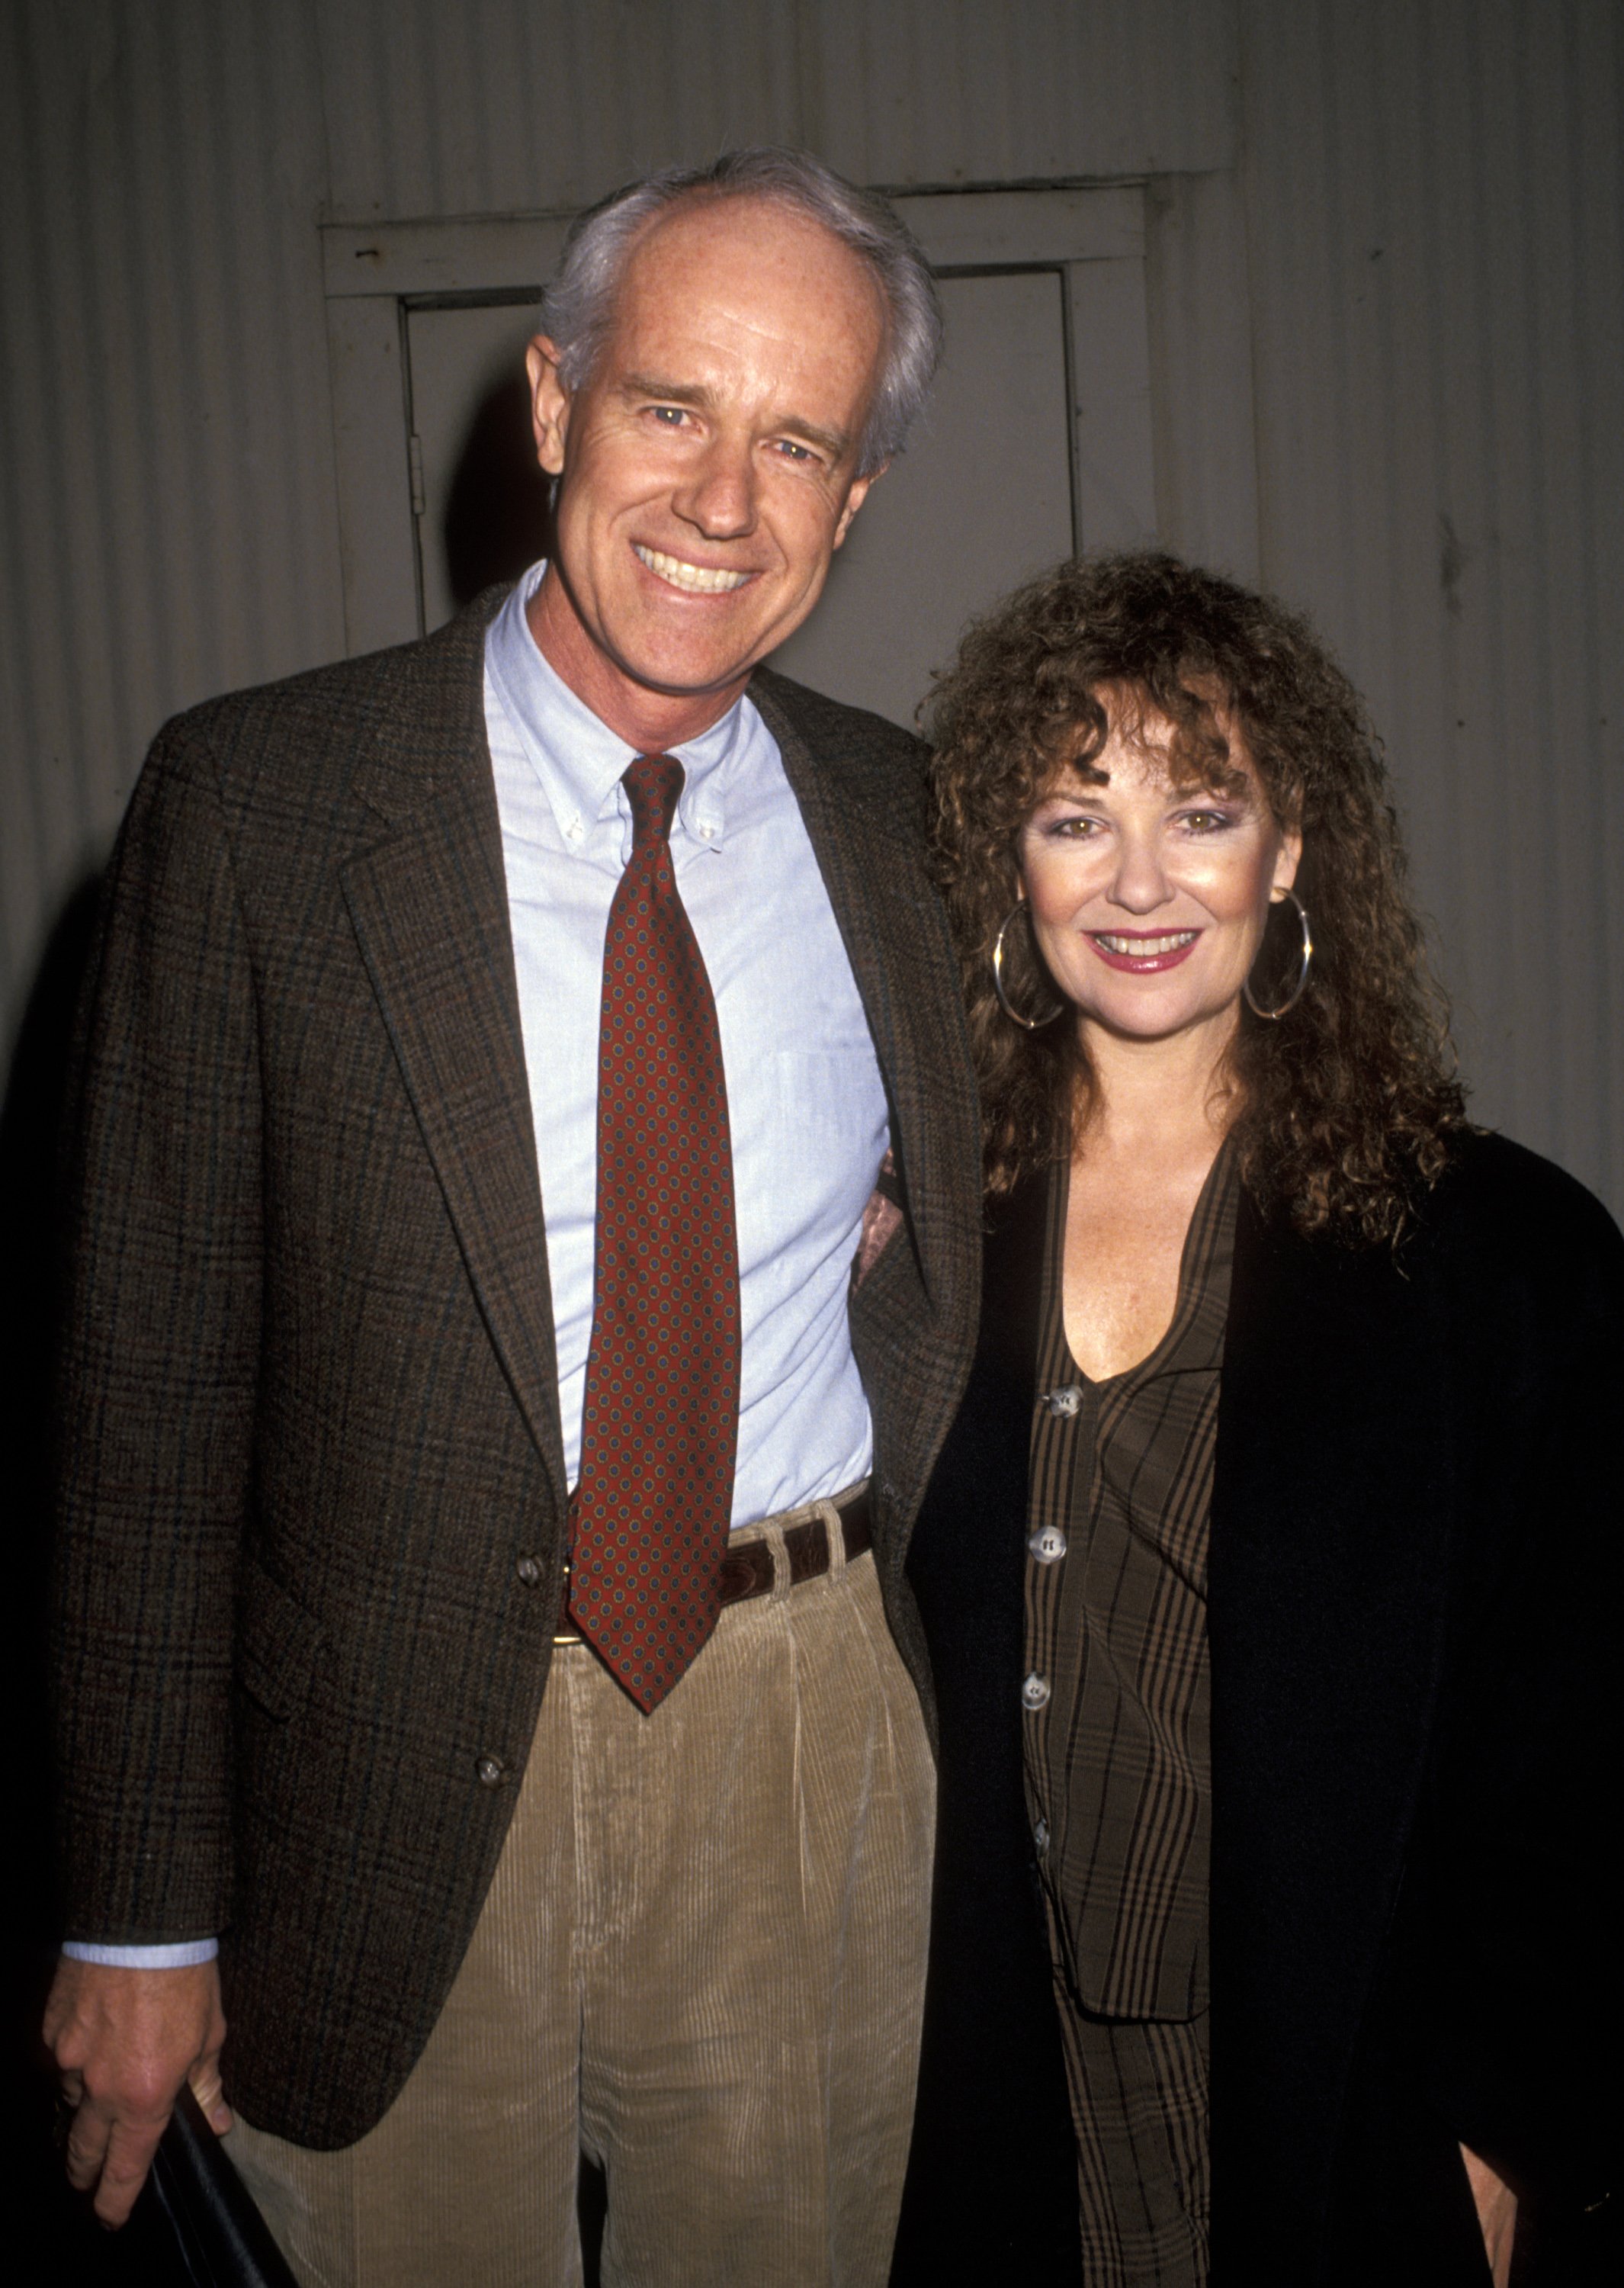 Mike Farrell and Shelley Fabares attend the Oxfam Hunger Banquet at Sony Studios on November 21, 1991 in Culver City, California. / Source: Getty Images